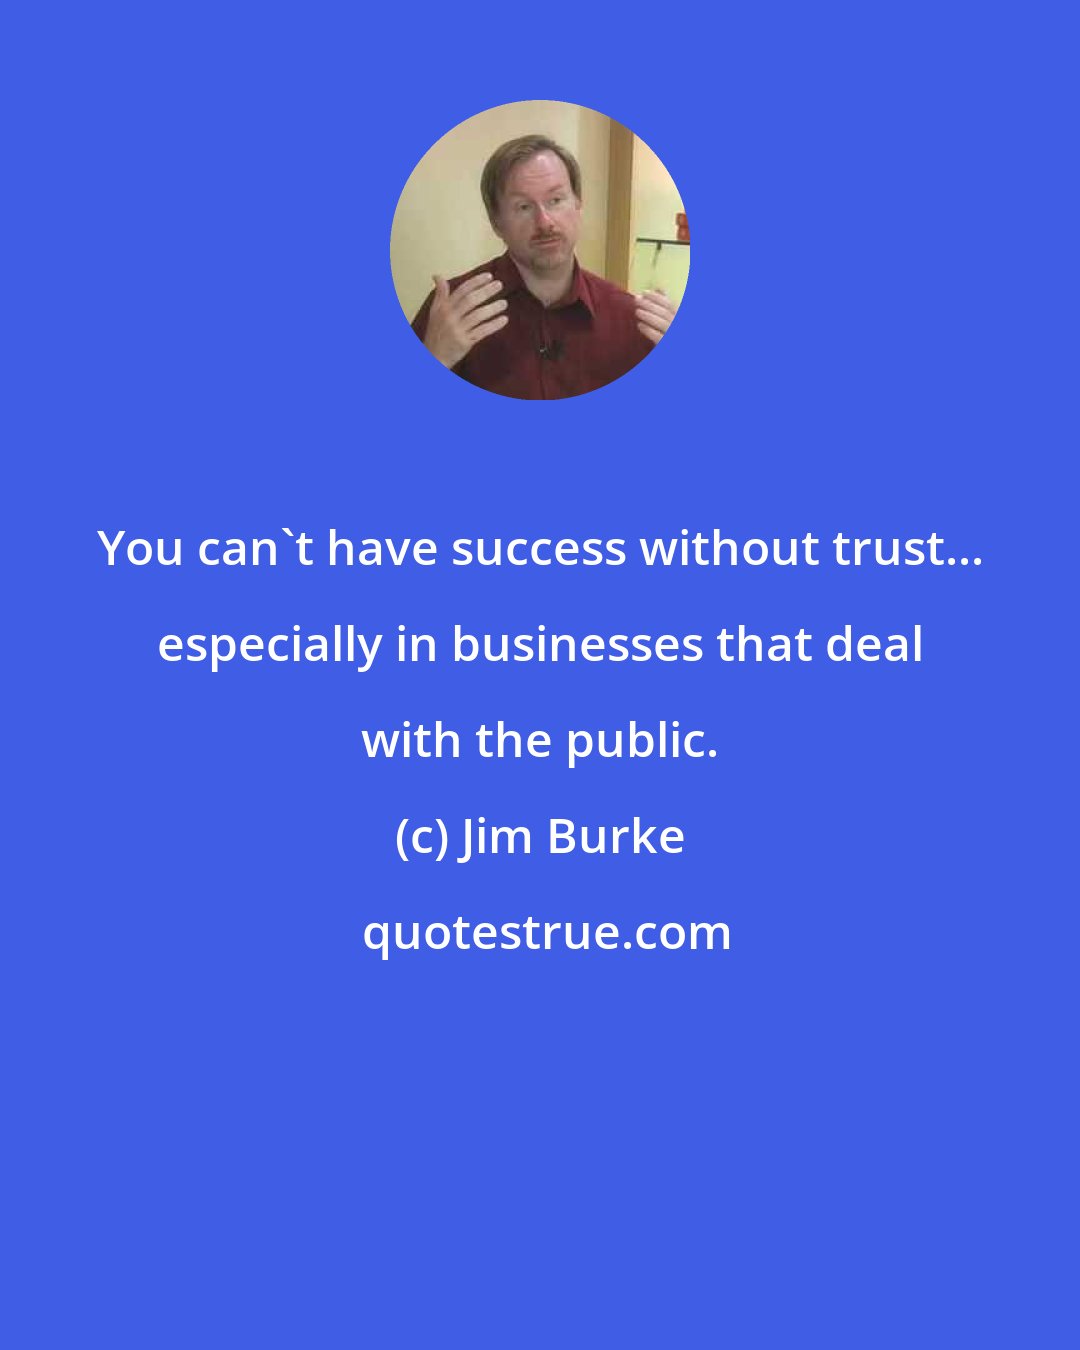 Jim Burke: You can't have success without trust... especially in businesses that deal with the public.